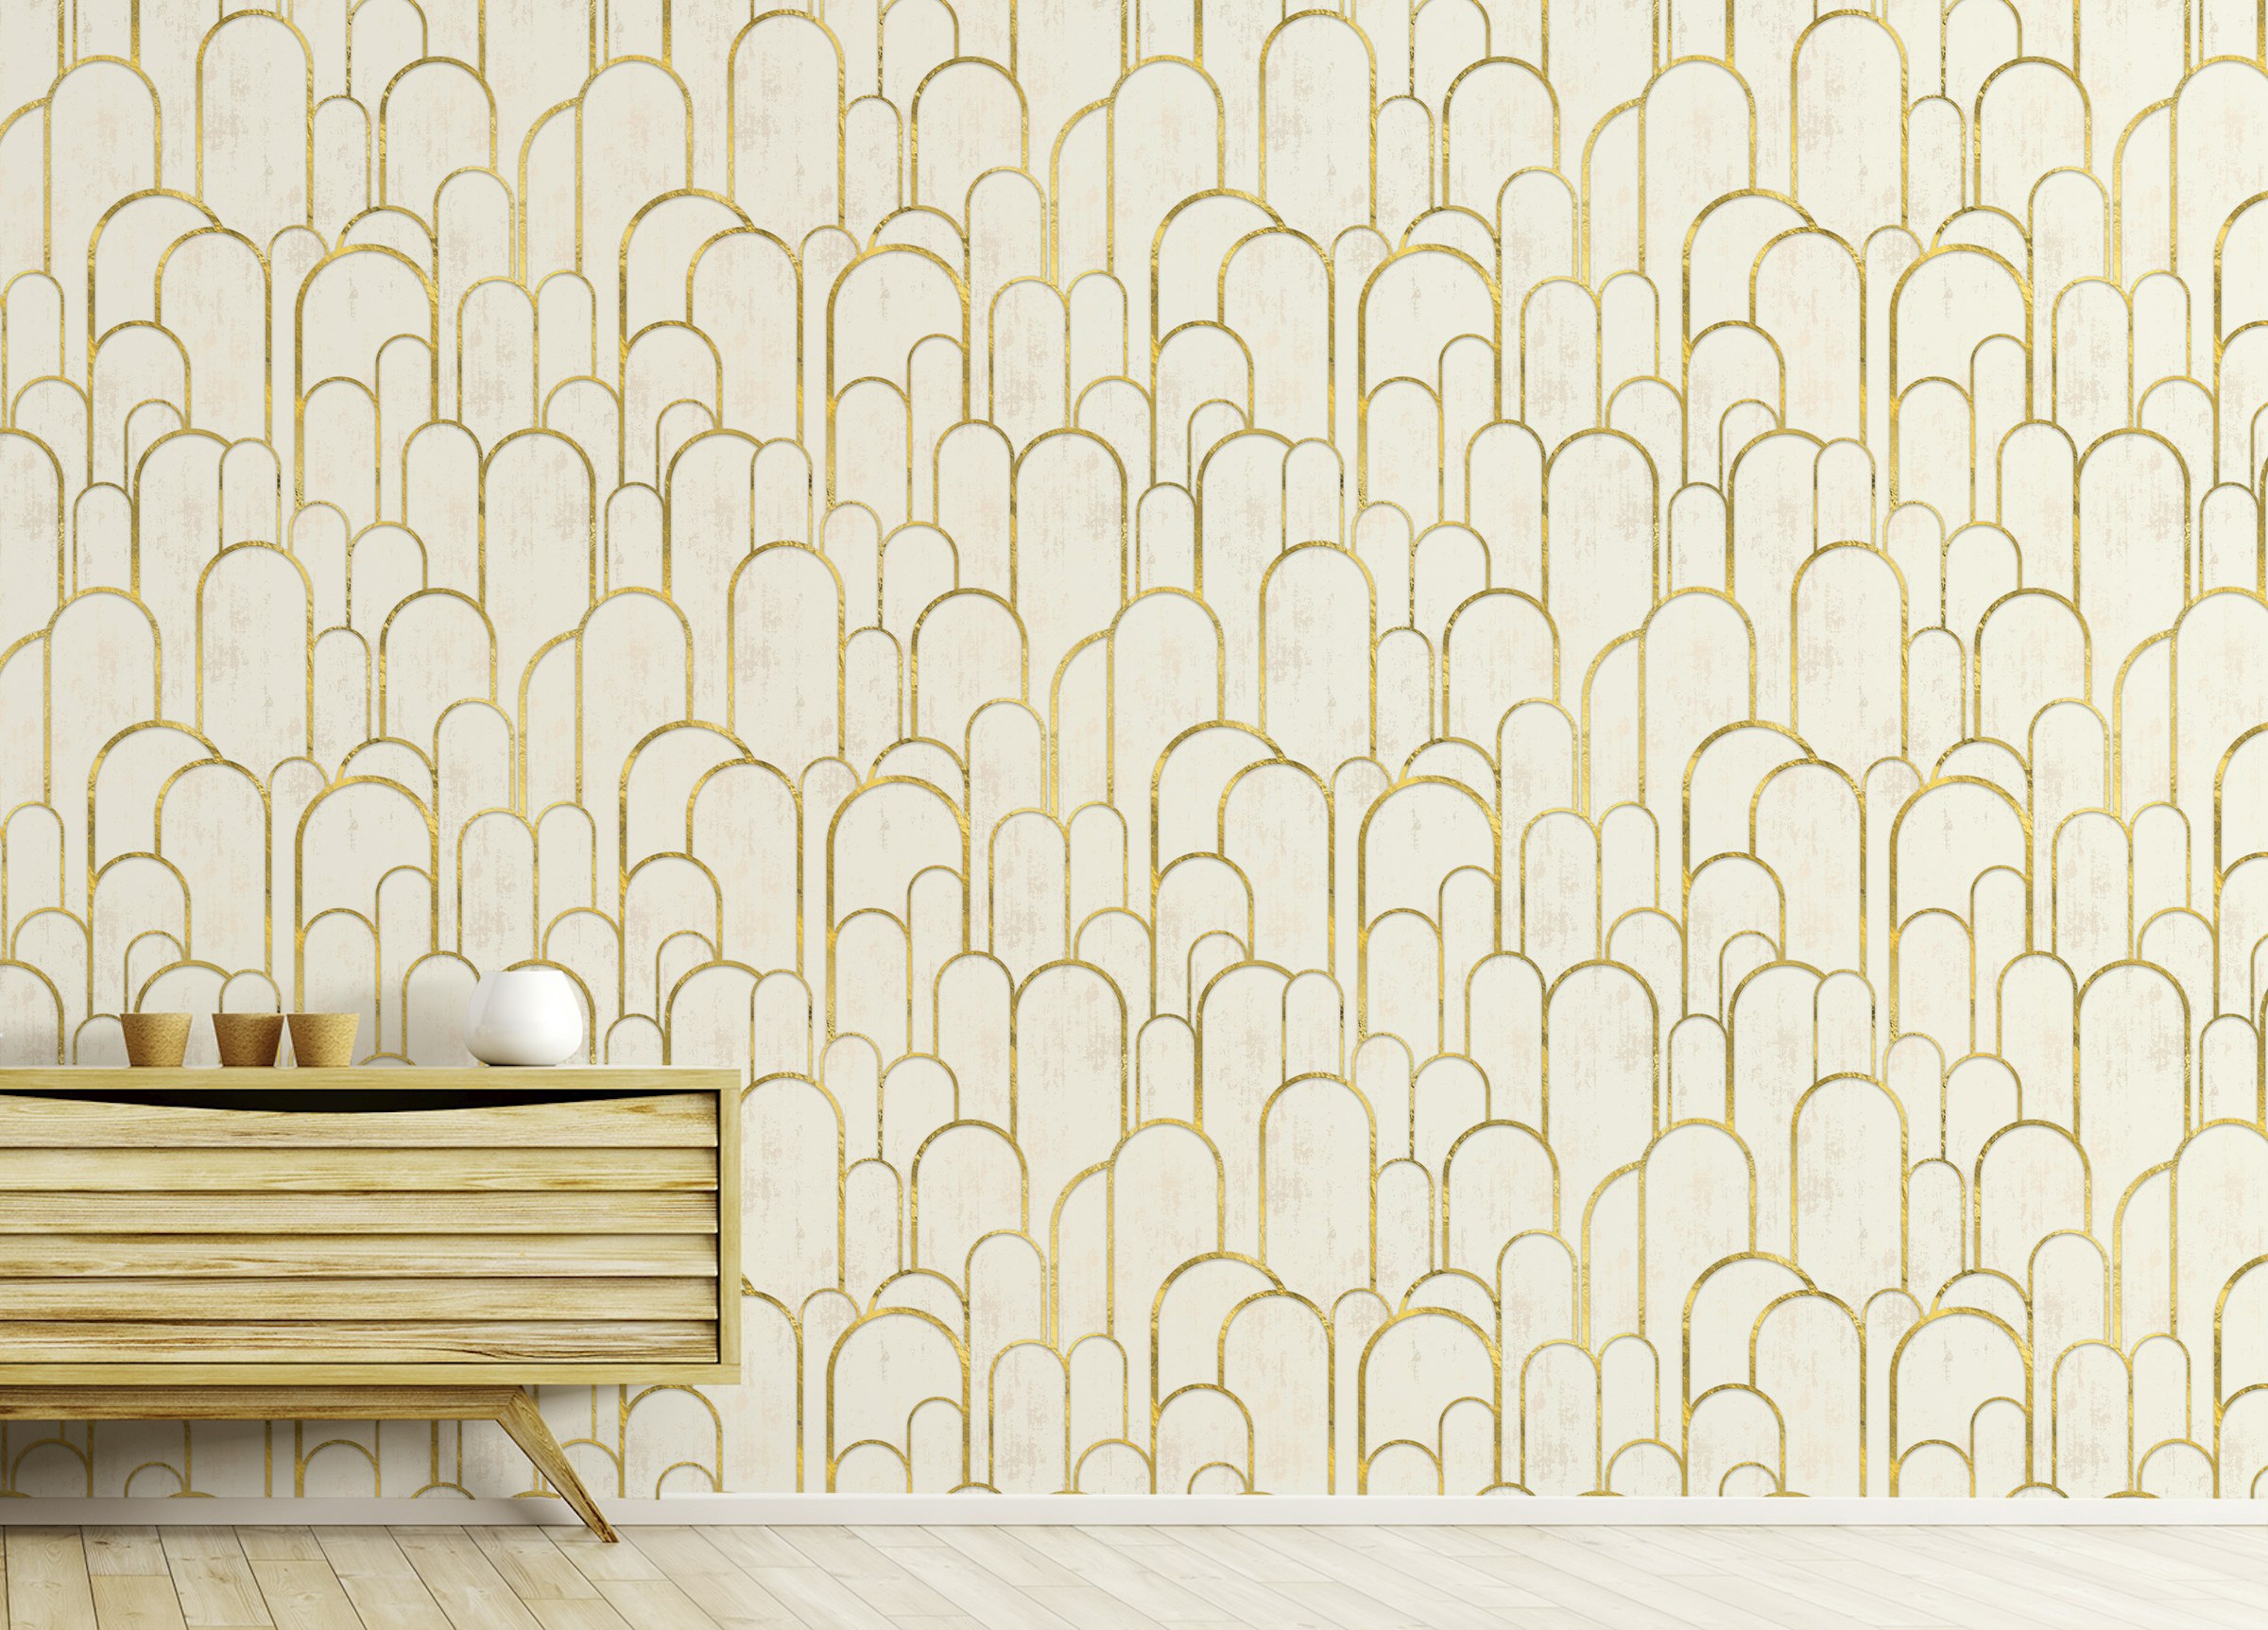 Peel and Stick Repeat Pattern Archway Golden Art Deco Wallpaper